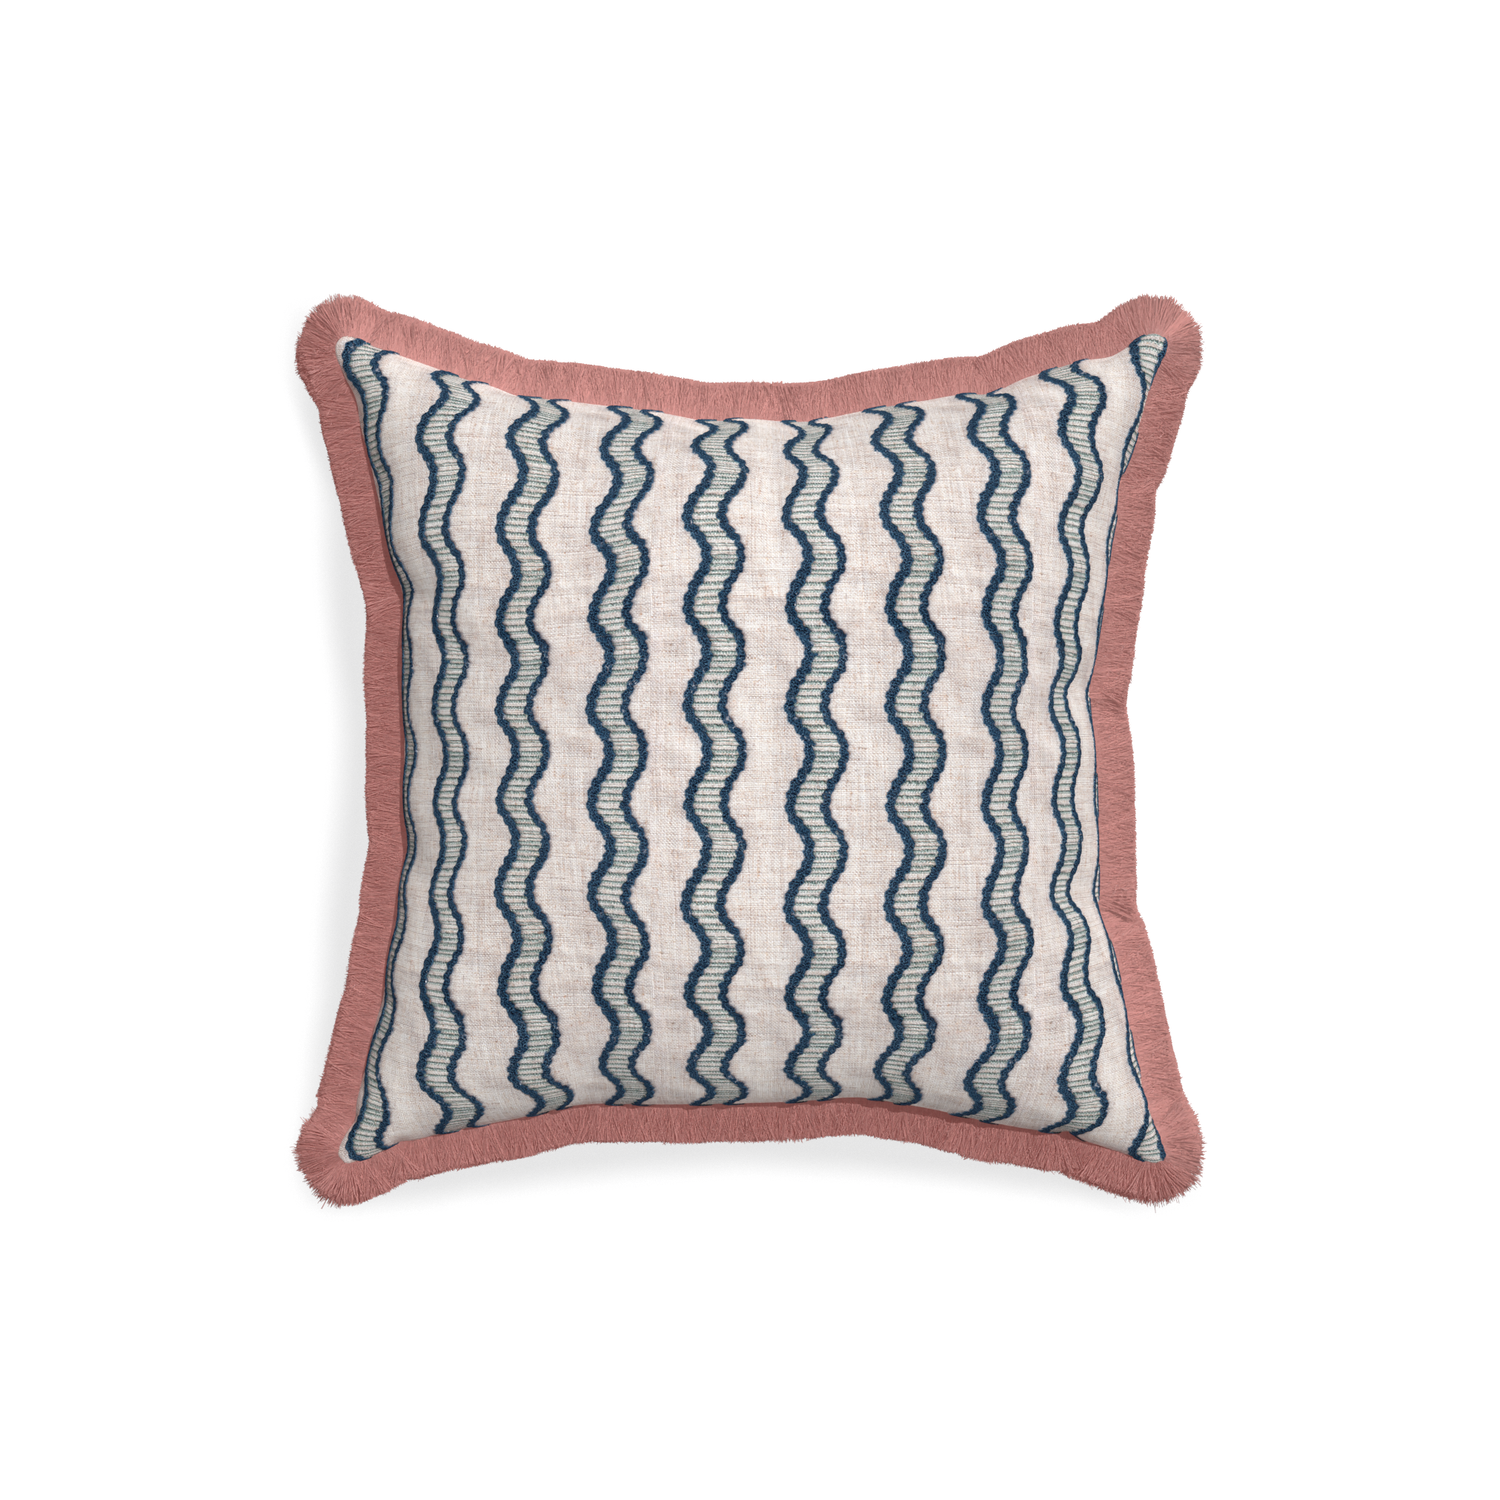 18-square beatrice custom embroidered wavepillow with d fringe on white background